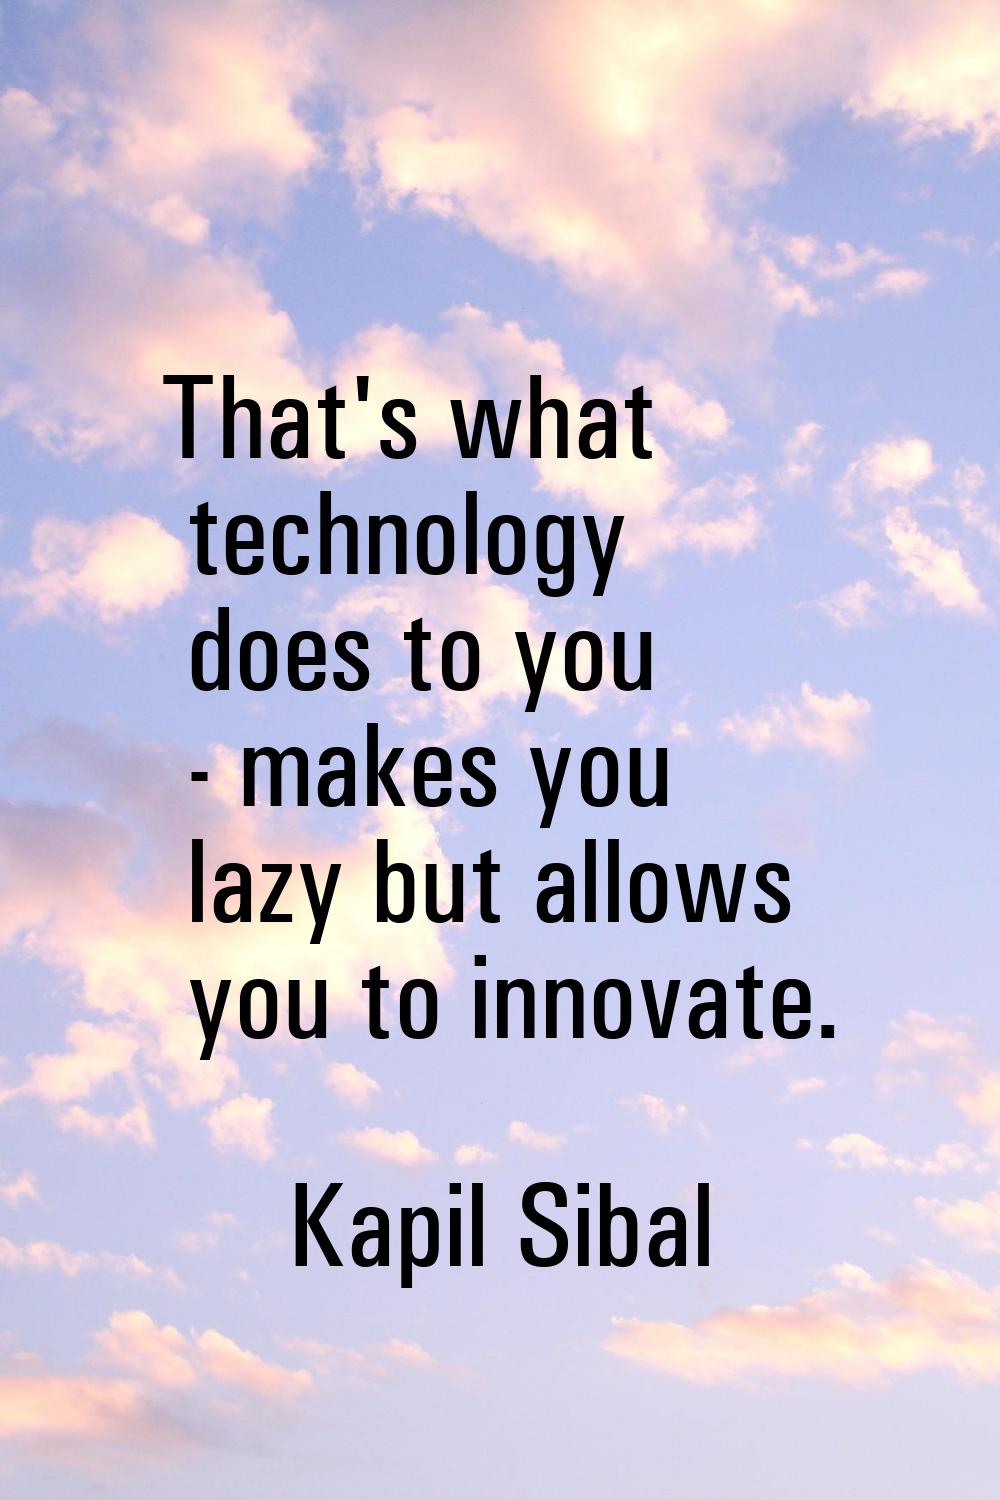 That's what technology does to you - makes you lazy but allows you to innovate.